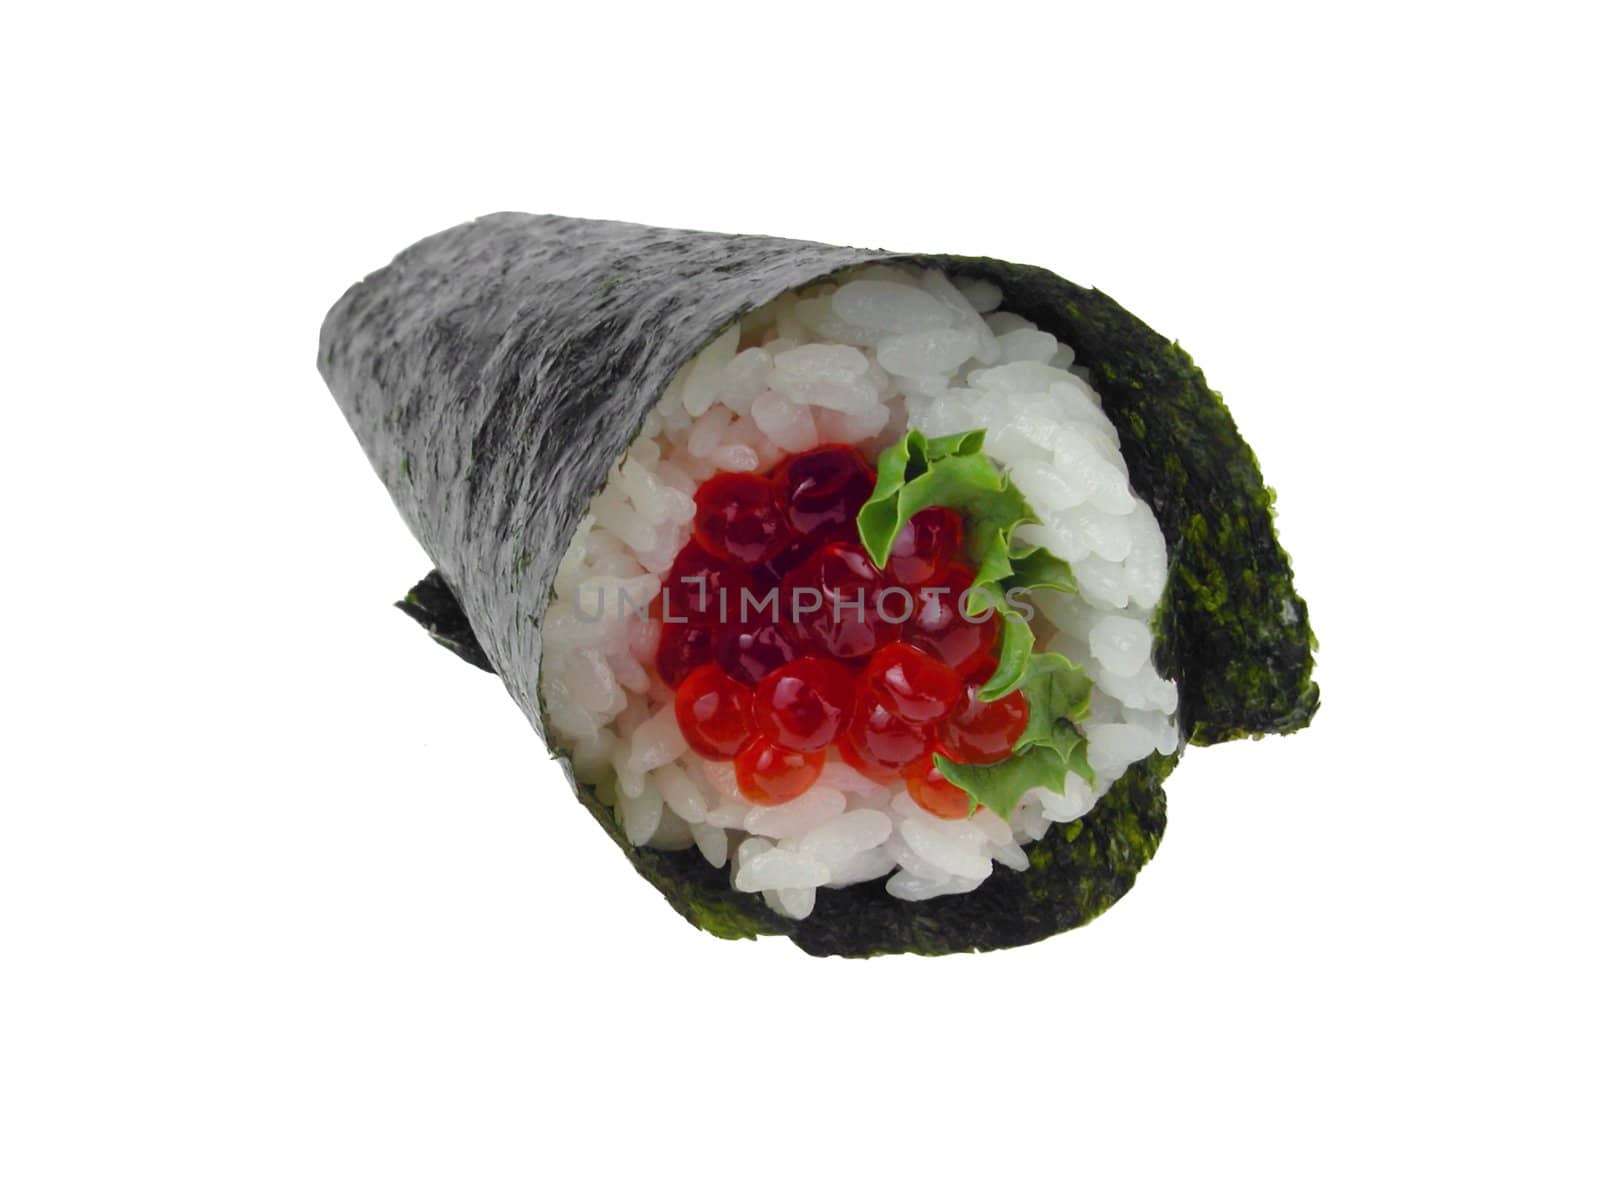 Salmon roe temaki(hand roll)-party style sushi        